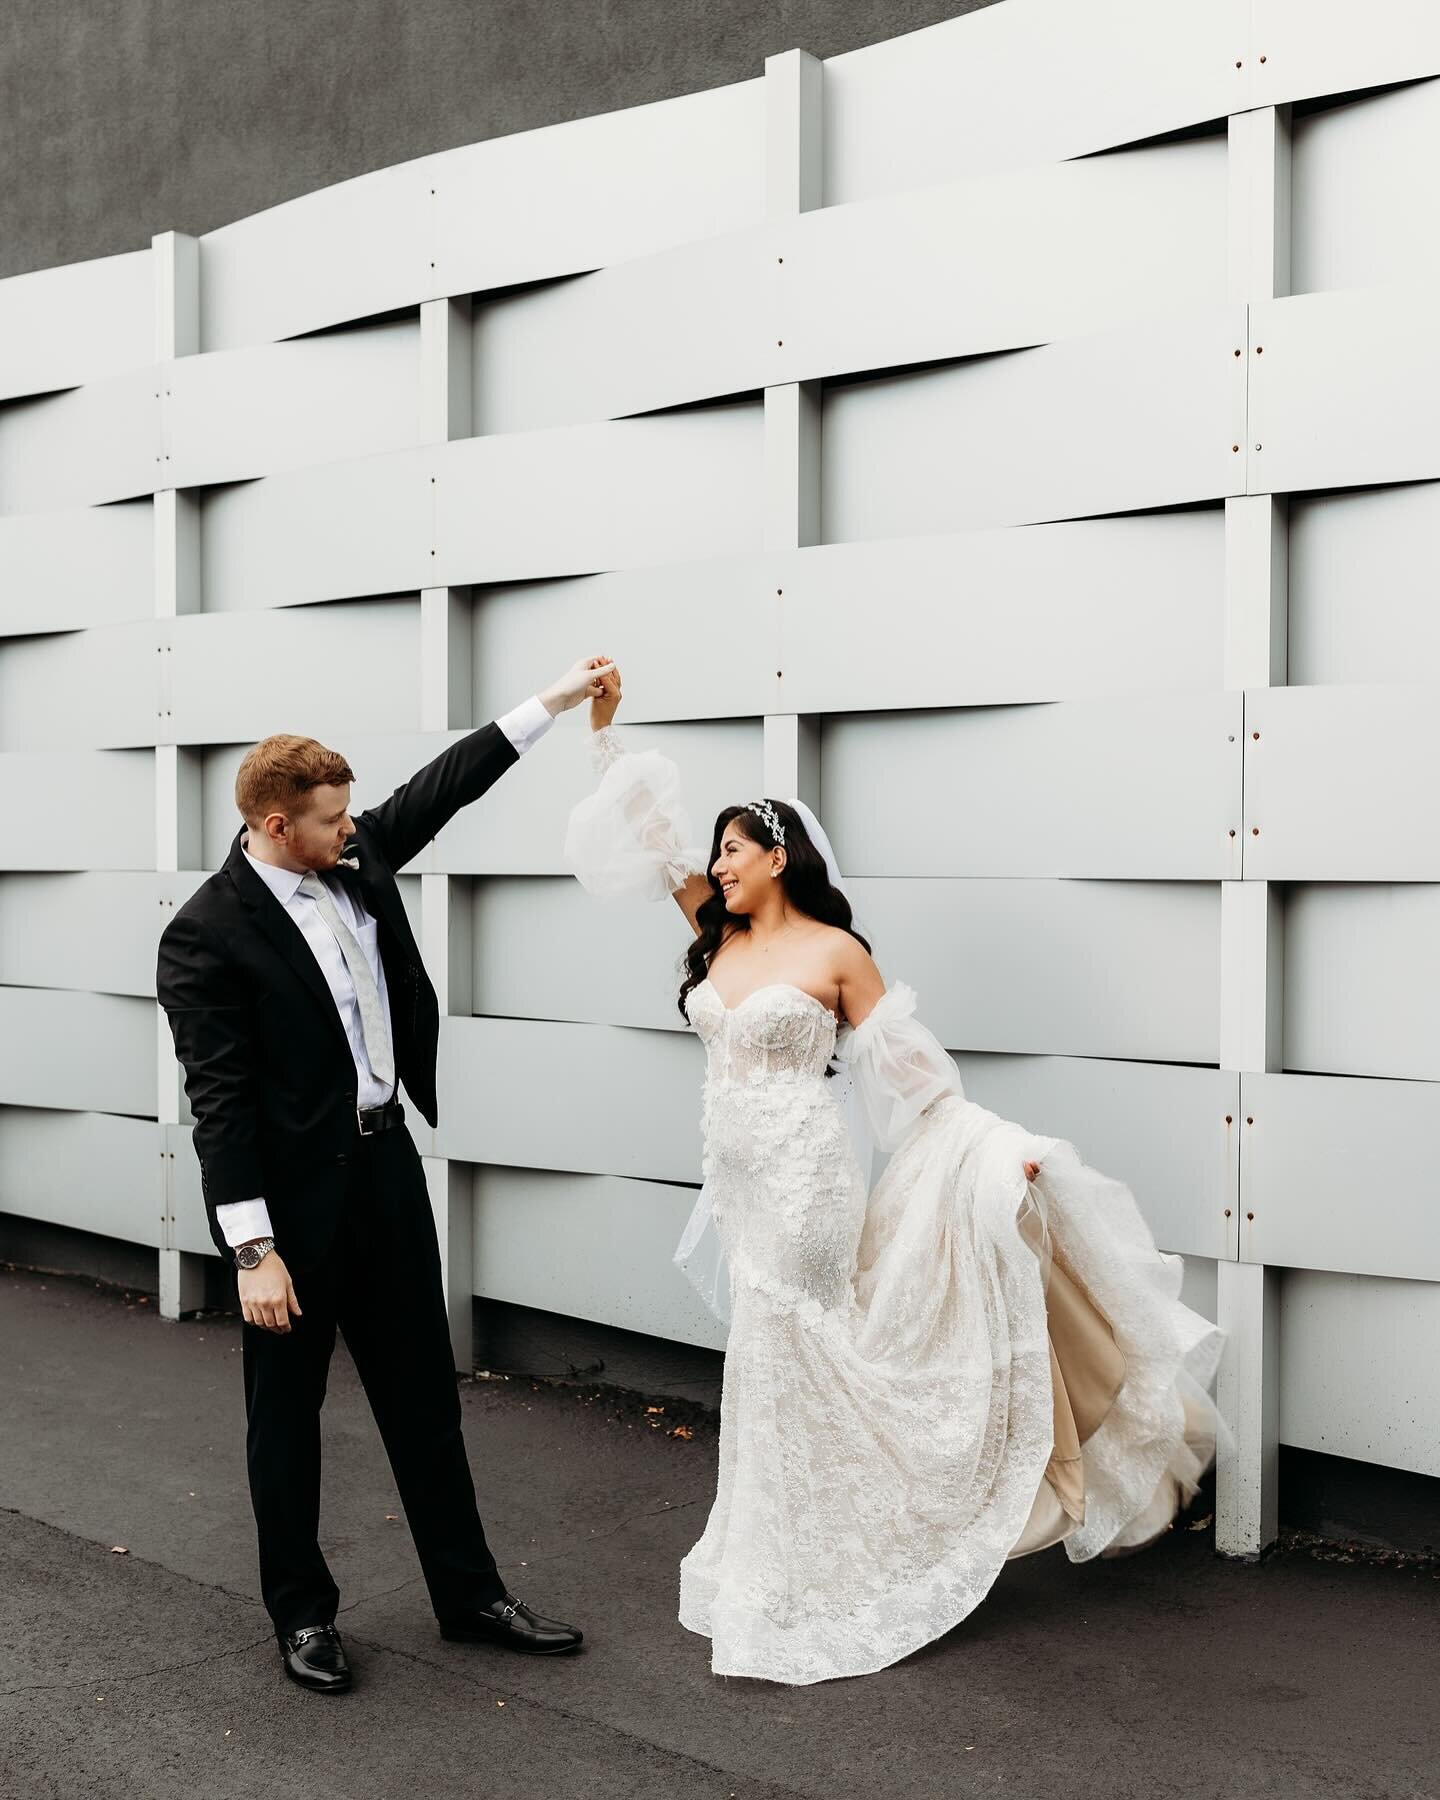 These two 🖤 Love all the fun photo opportunities downtown around @600eastevents You can get 4-5 completely different backdrops within walking distance for gorgeous variety in your gallery! 

📷: @marissawileyphoto